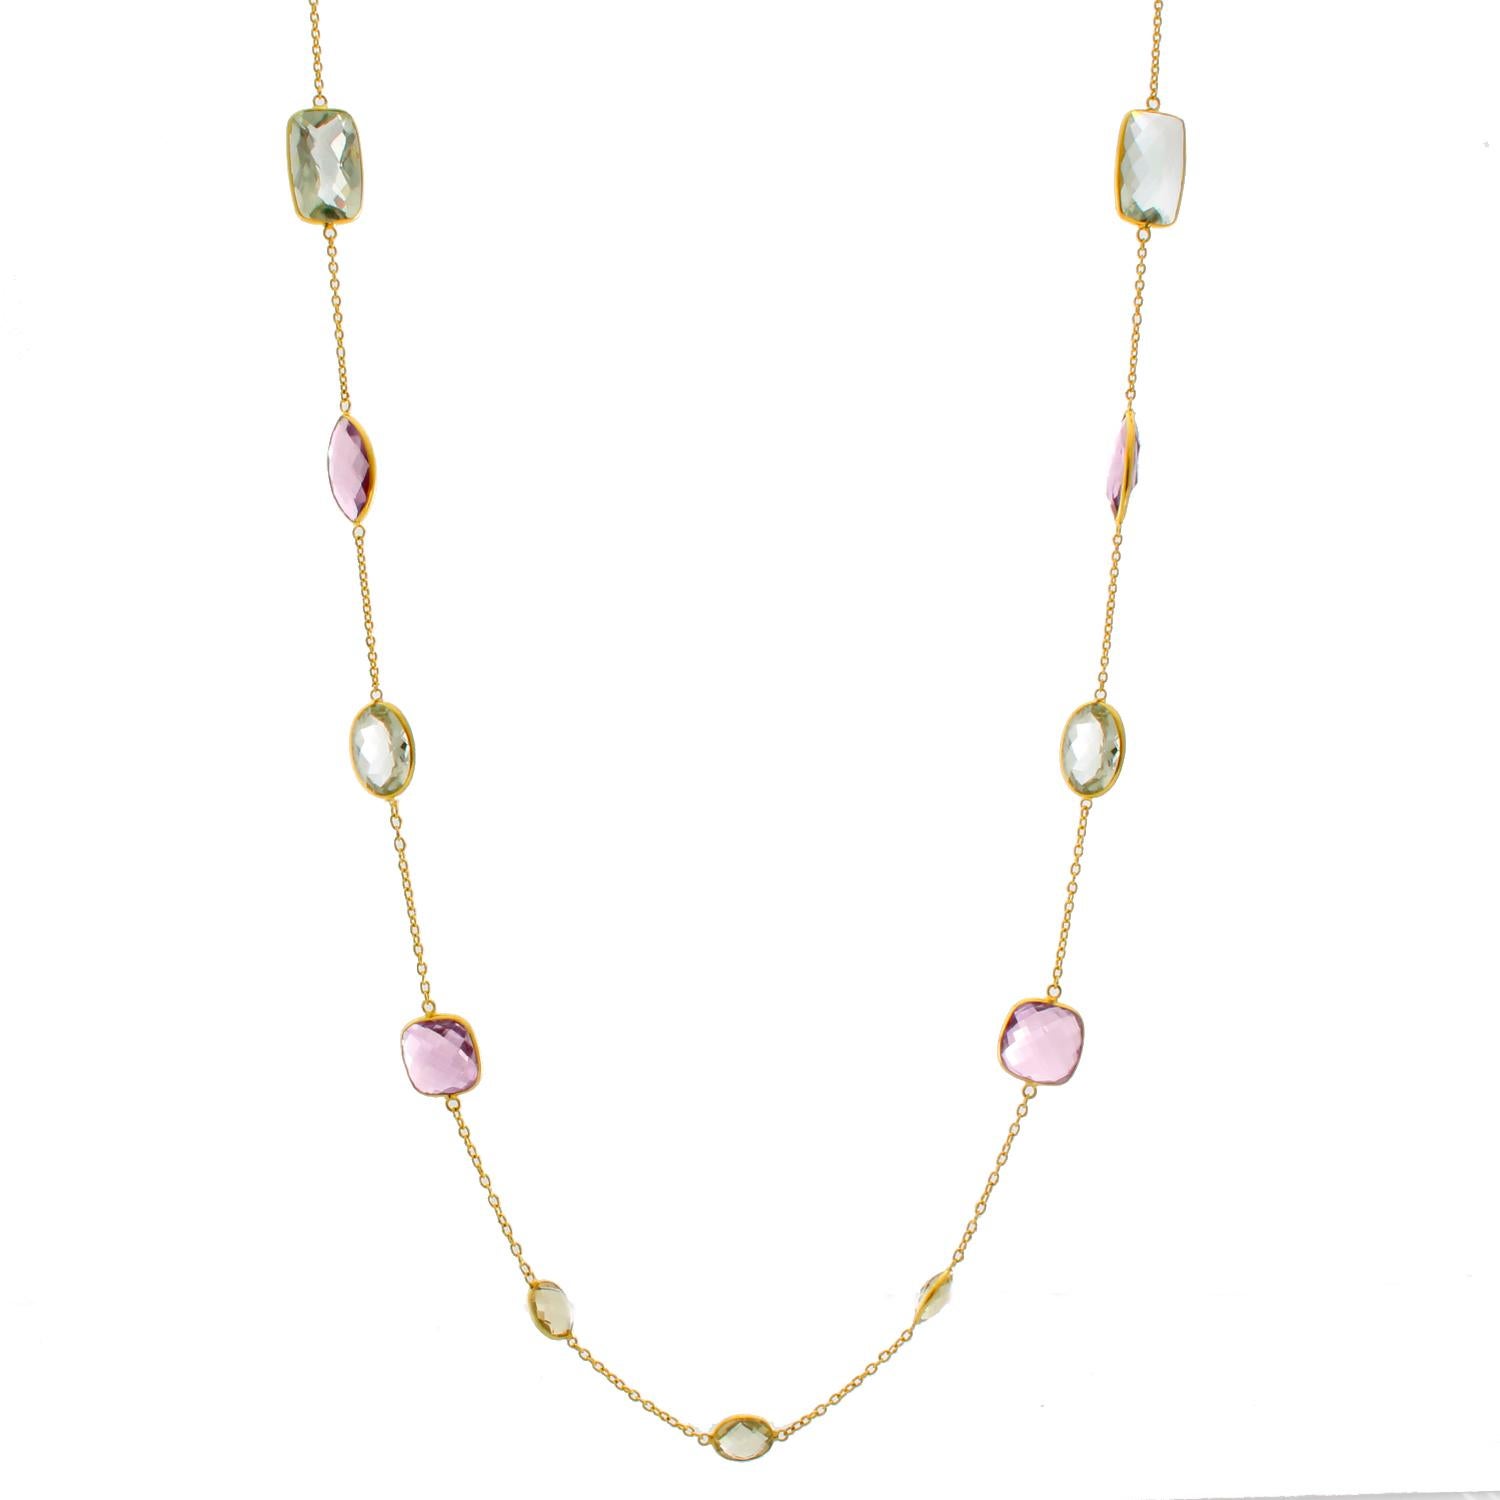 18K Yellow Gold Amethyst Necklace - 18K Yellow gold necklace measuring 19 inches, houses multi-cut purple amethyst, round cut lemon quartz, and multi-cut green quartz stones. New with DeMesy box.